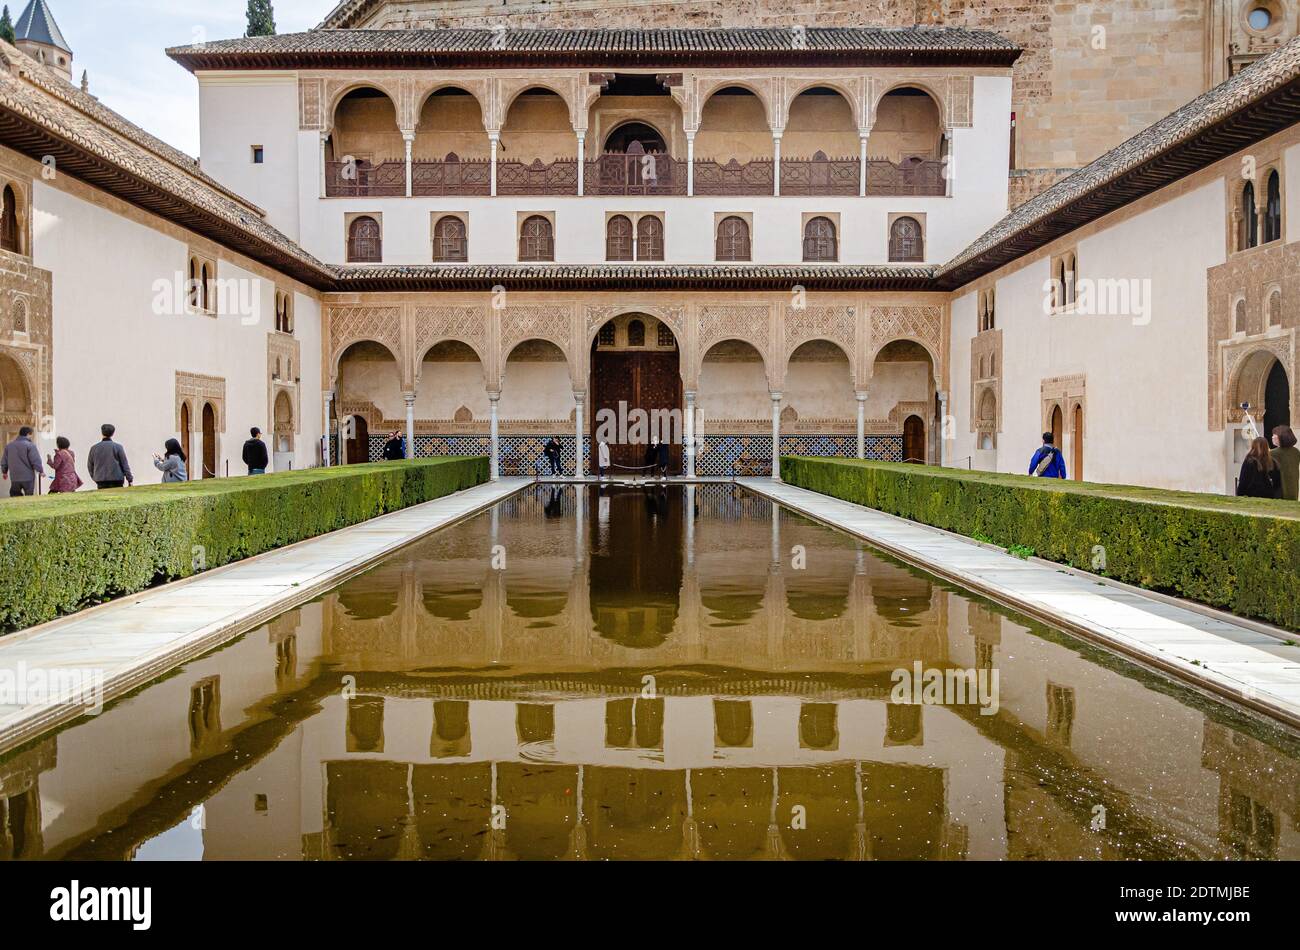 The Court of the Myrtles, Alhambra Stock Photo